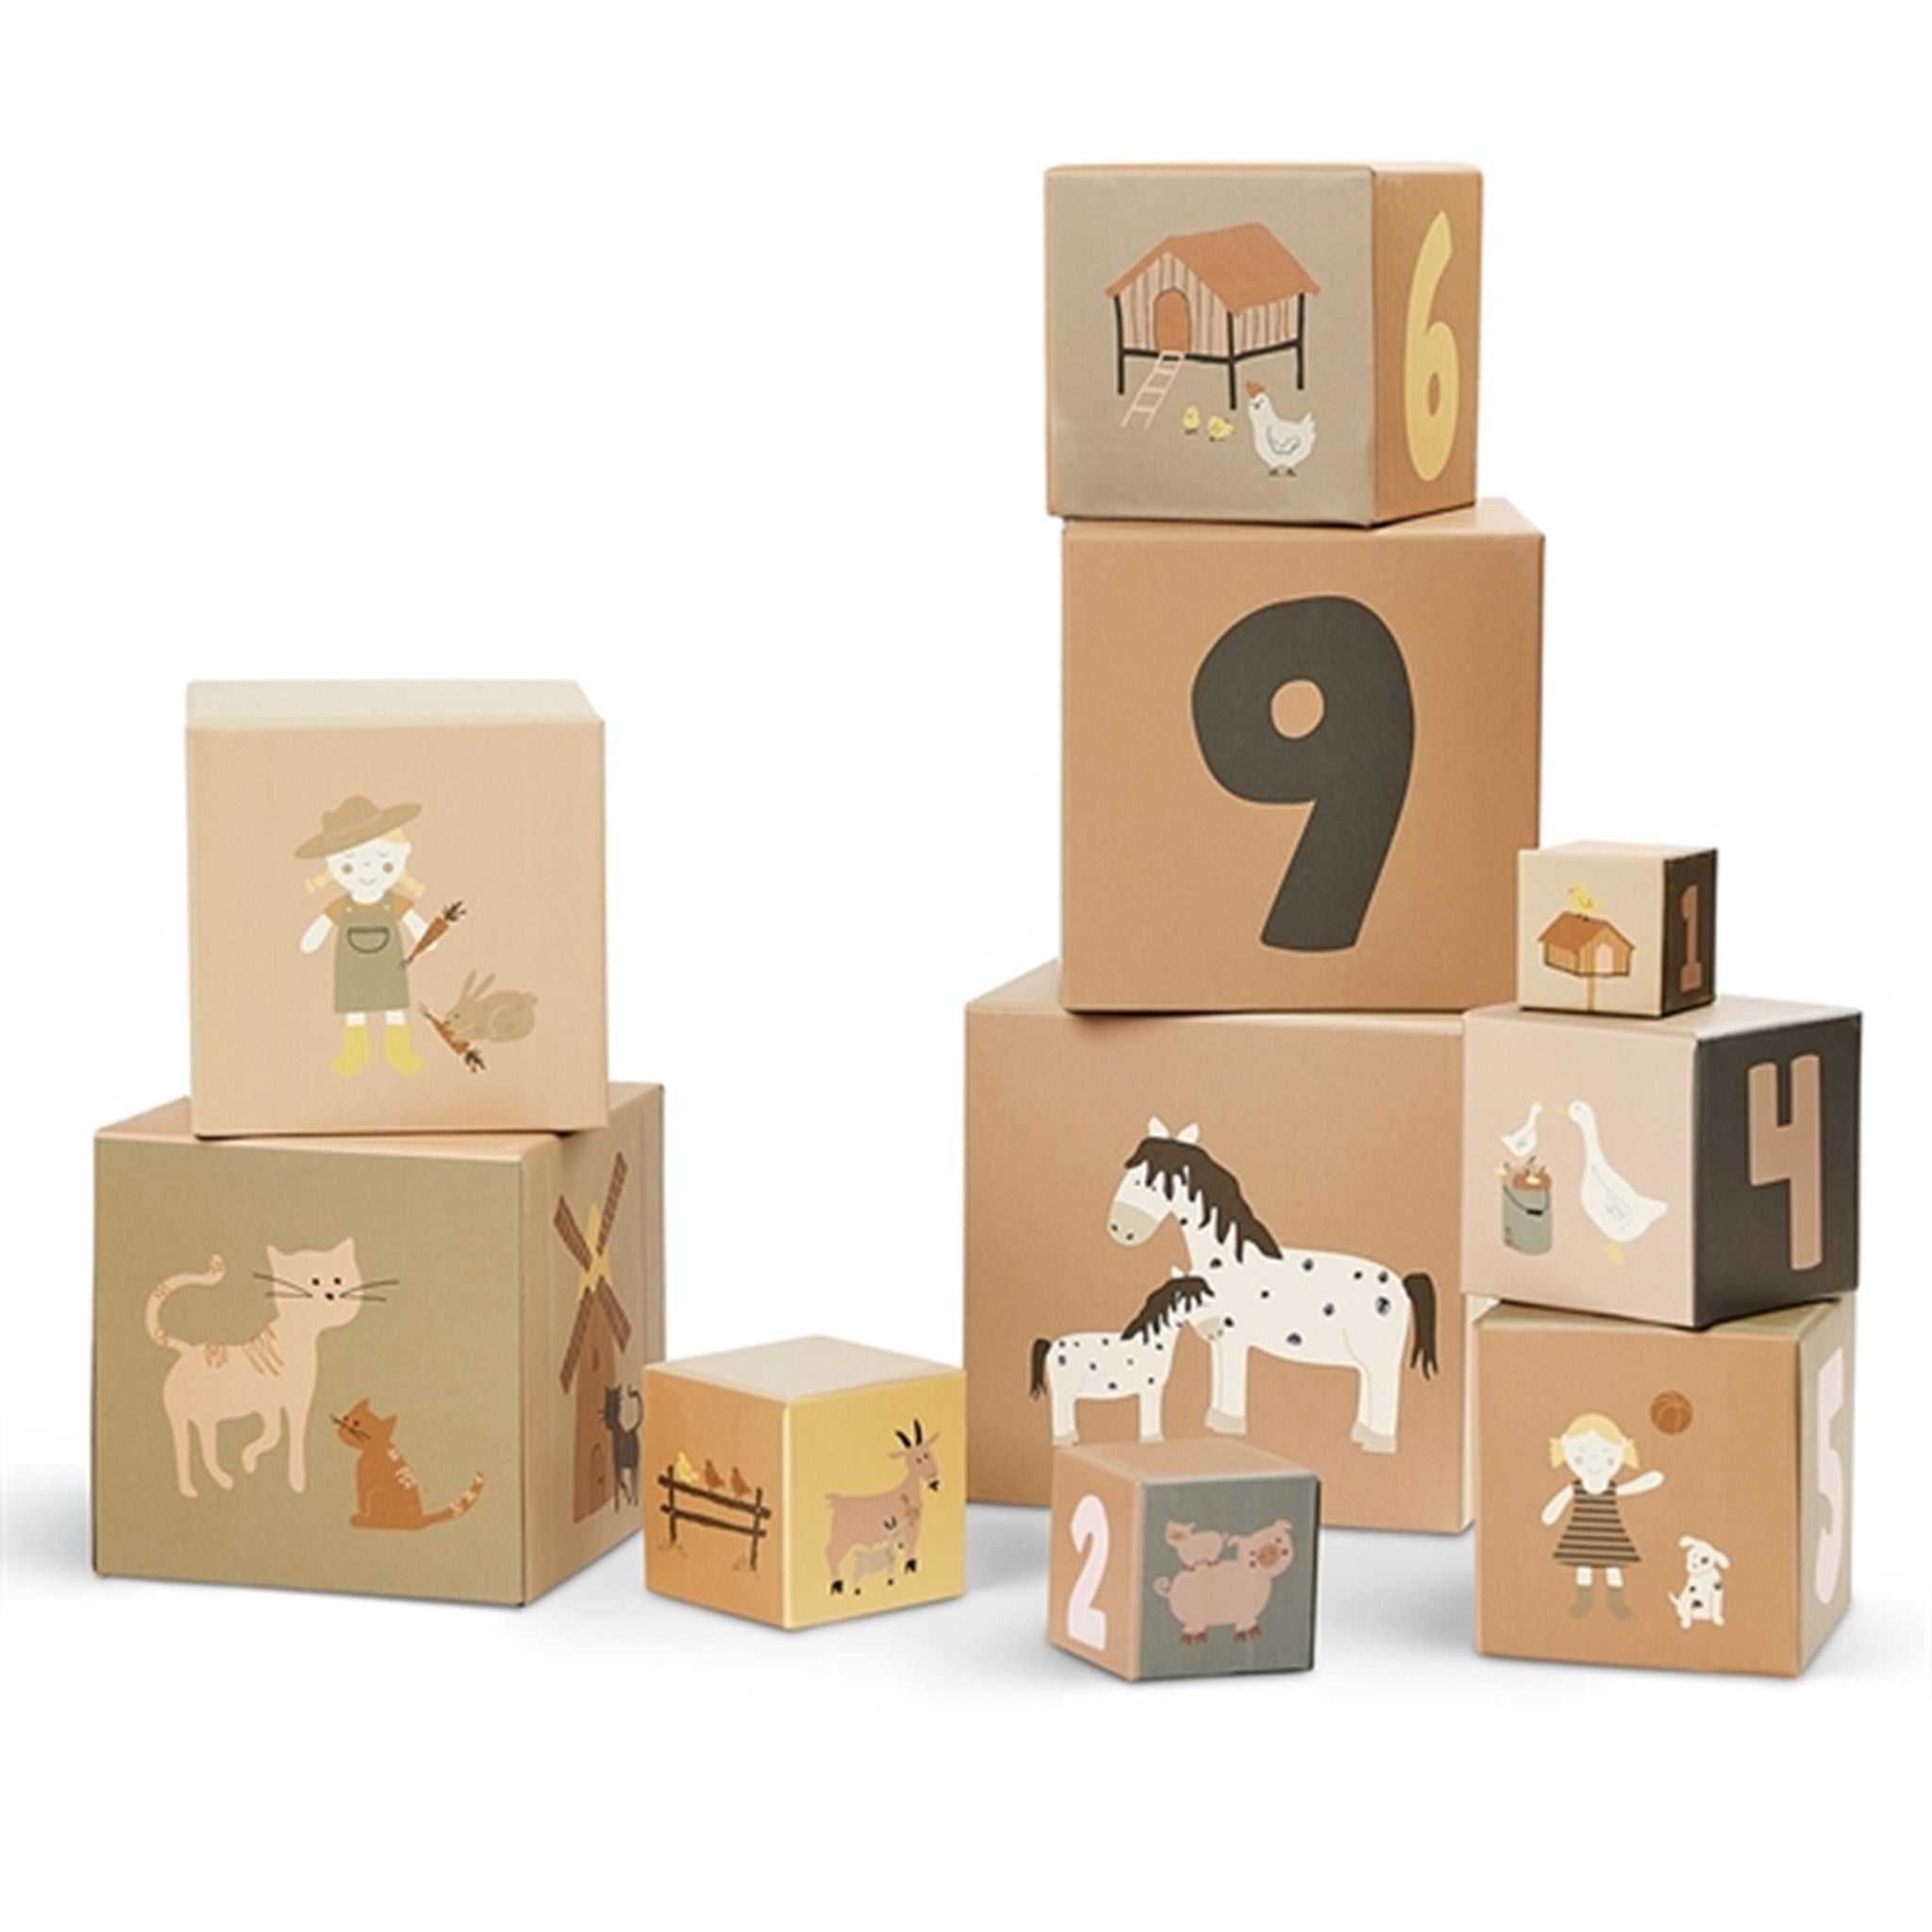 Smallstuff Stacking Boxes 1-10 Farm And Dolls